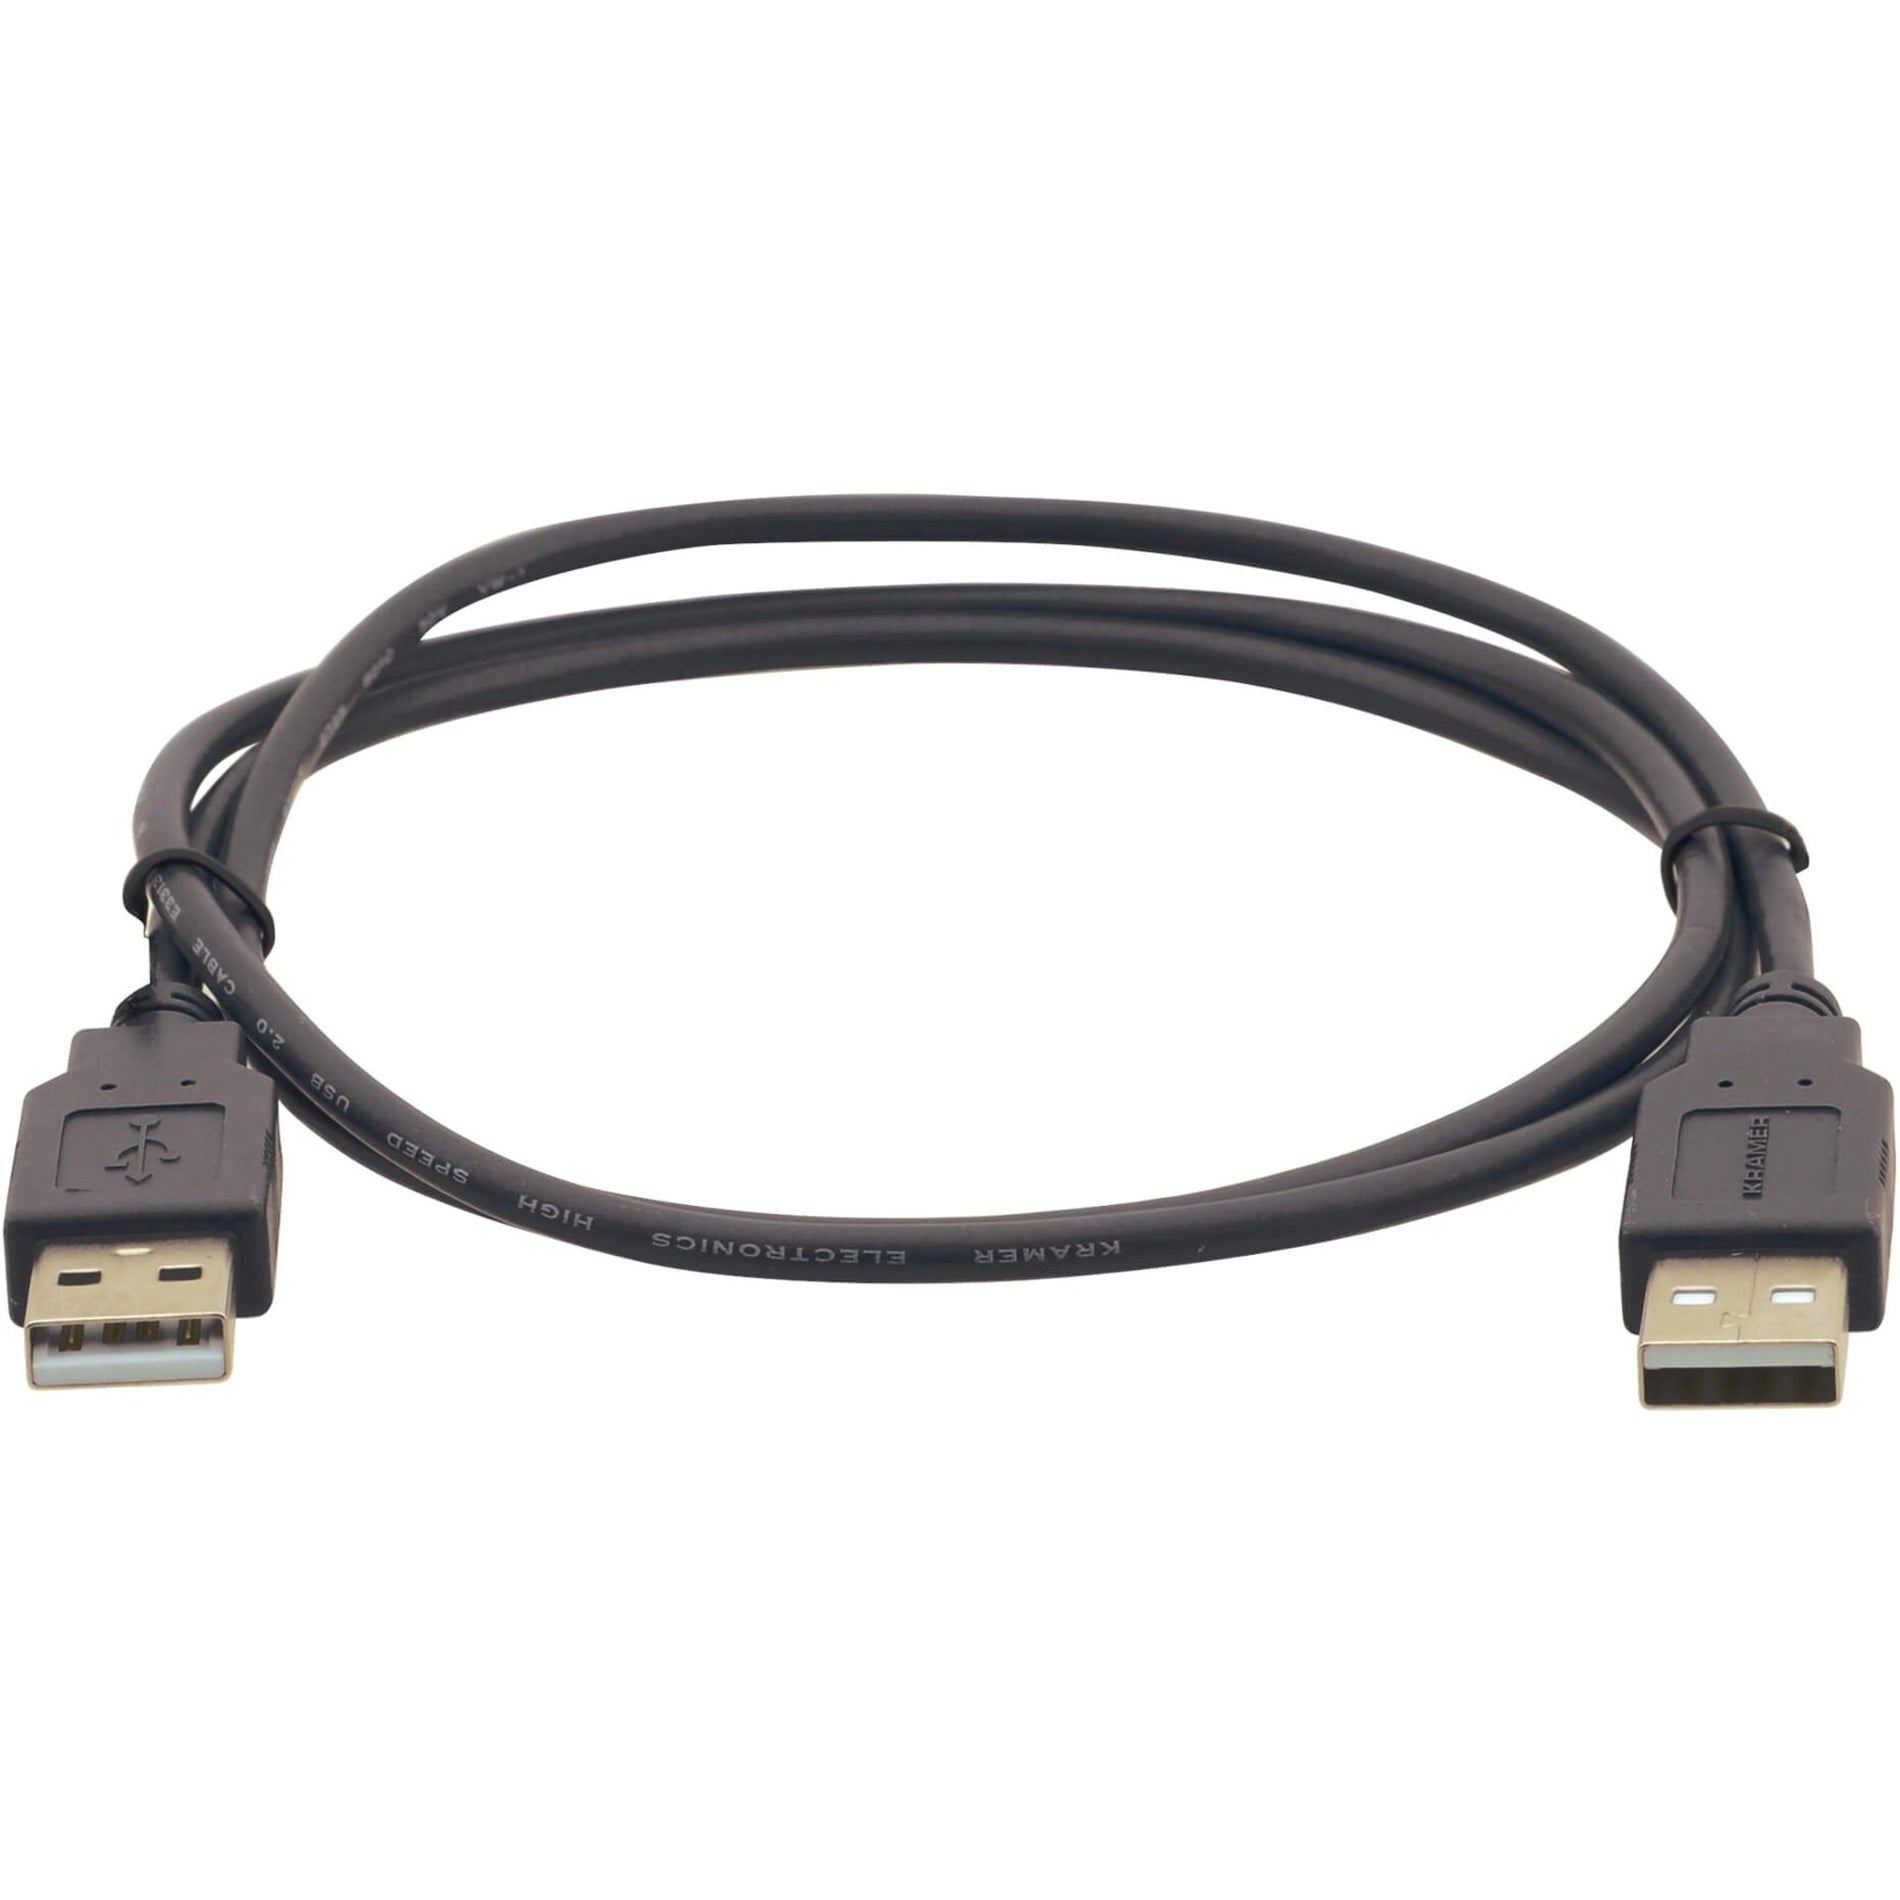 Kramer 96-0212006 USB 2.0 A to A Cable, 6ft / 1.8m, High-Speed Data Transfer